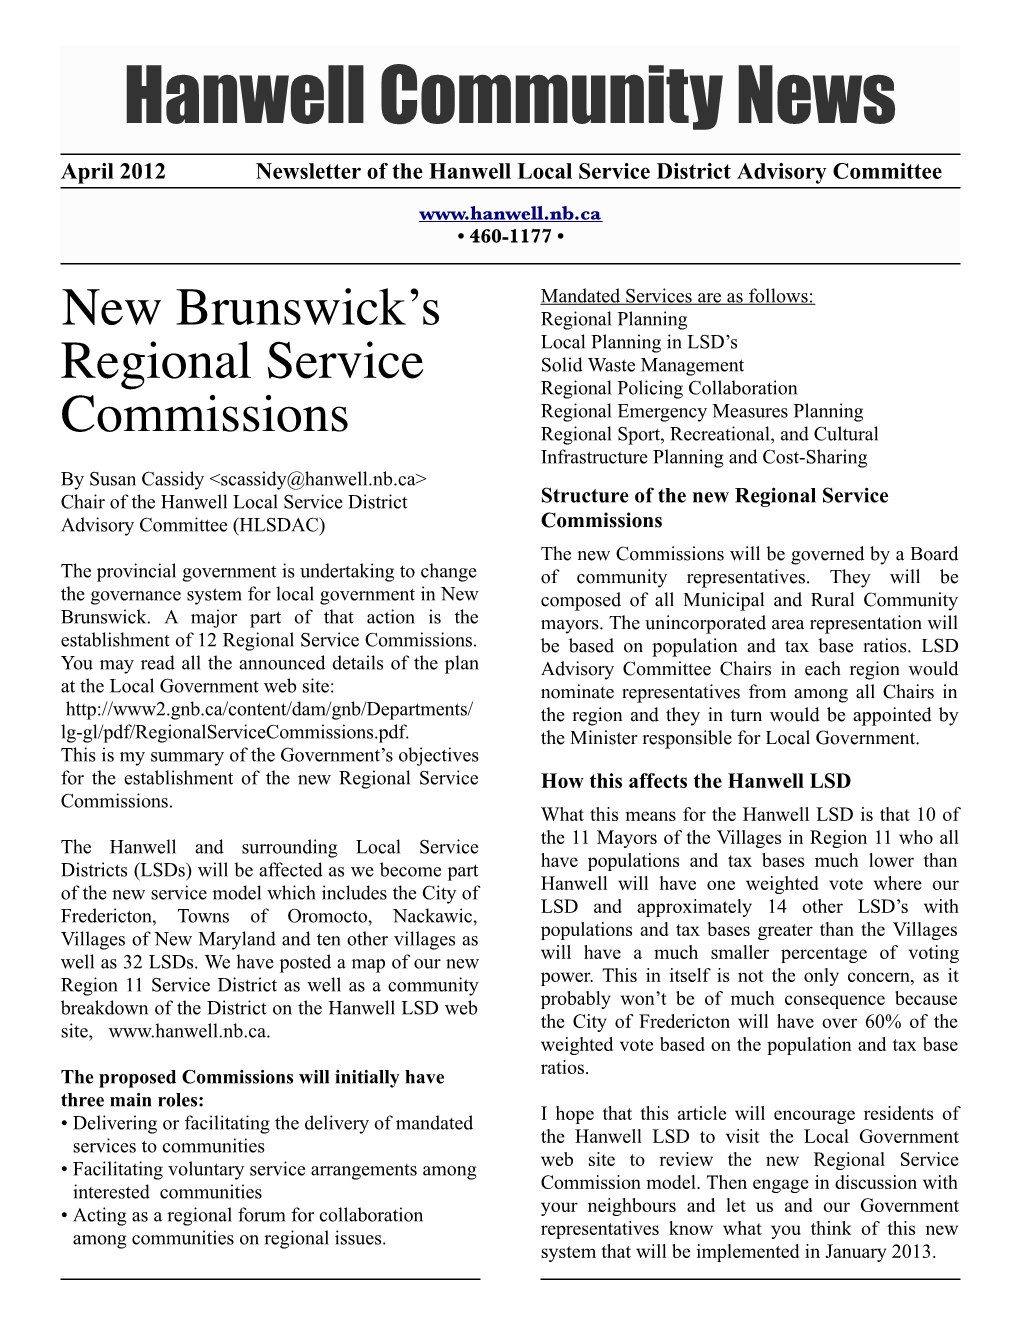 April 2012 – Newsletter of the Hanwell Local Service District Advisory